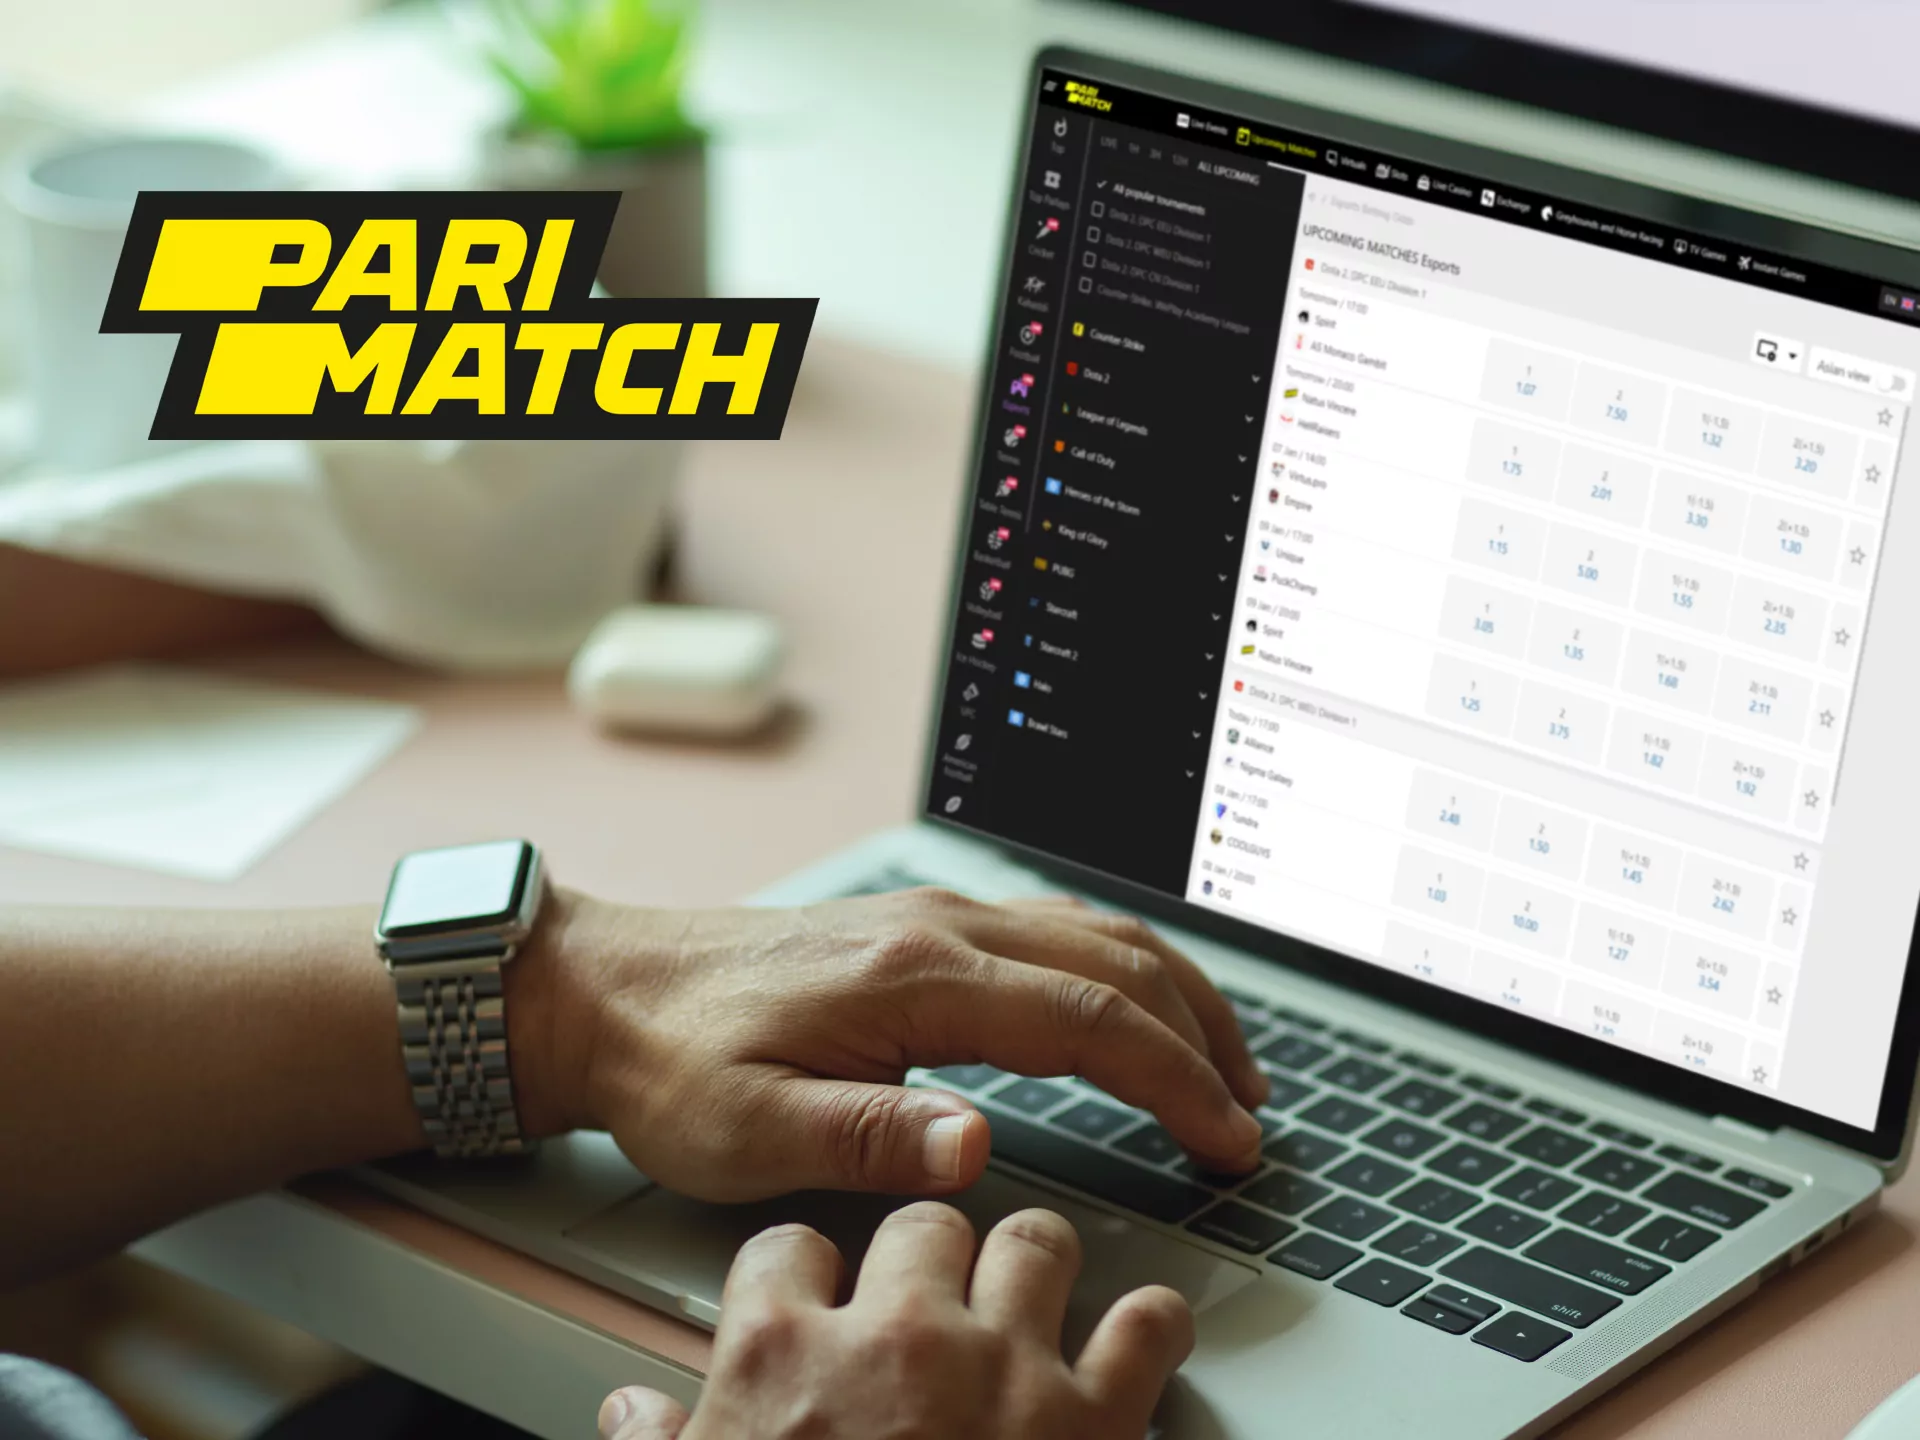 Parimatch is one of the most trustworthy sites that accept bets on esports matches.